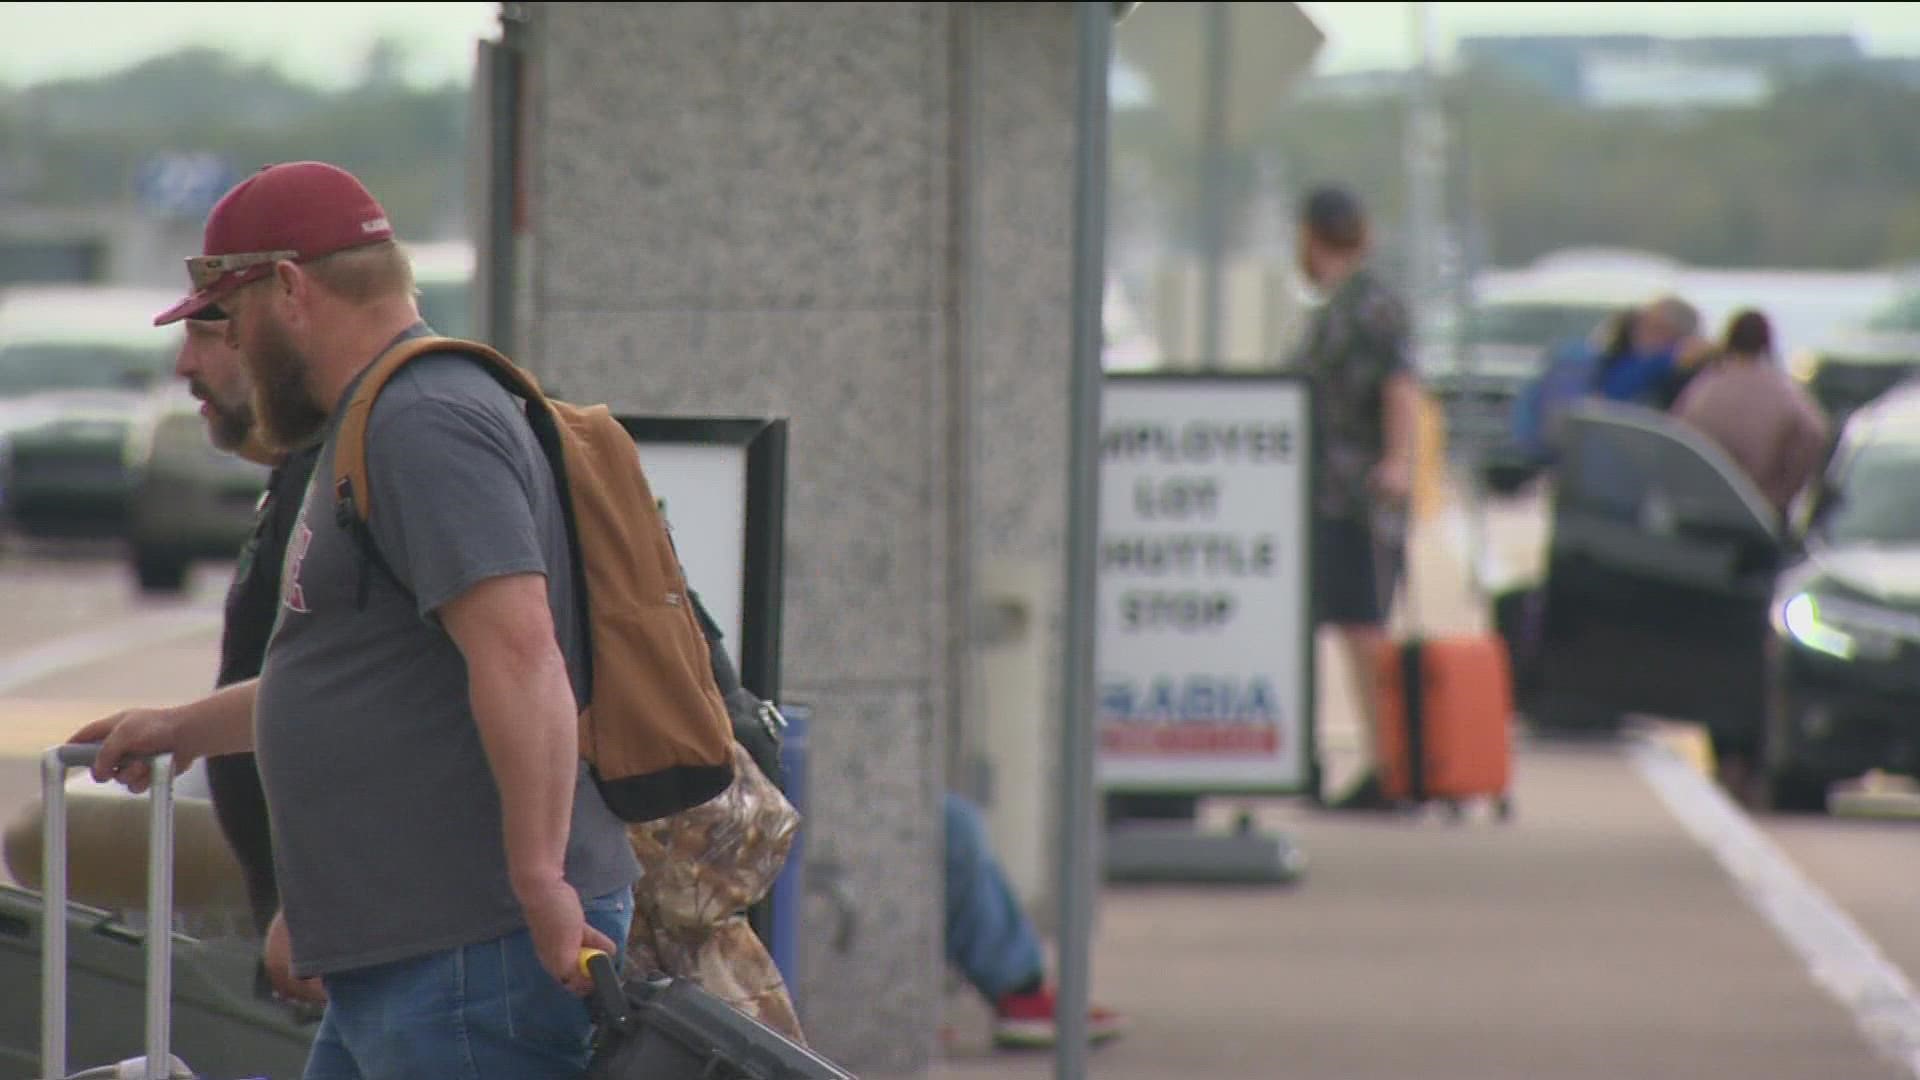 The Austin airport is seeing an increase in people with the temperatures dropping before the holidays.